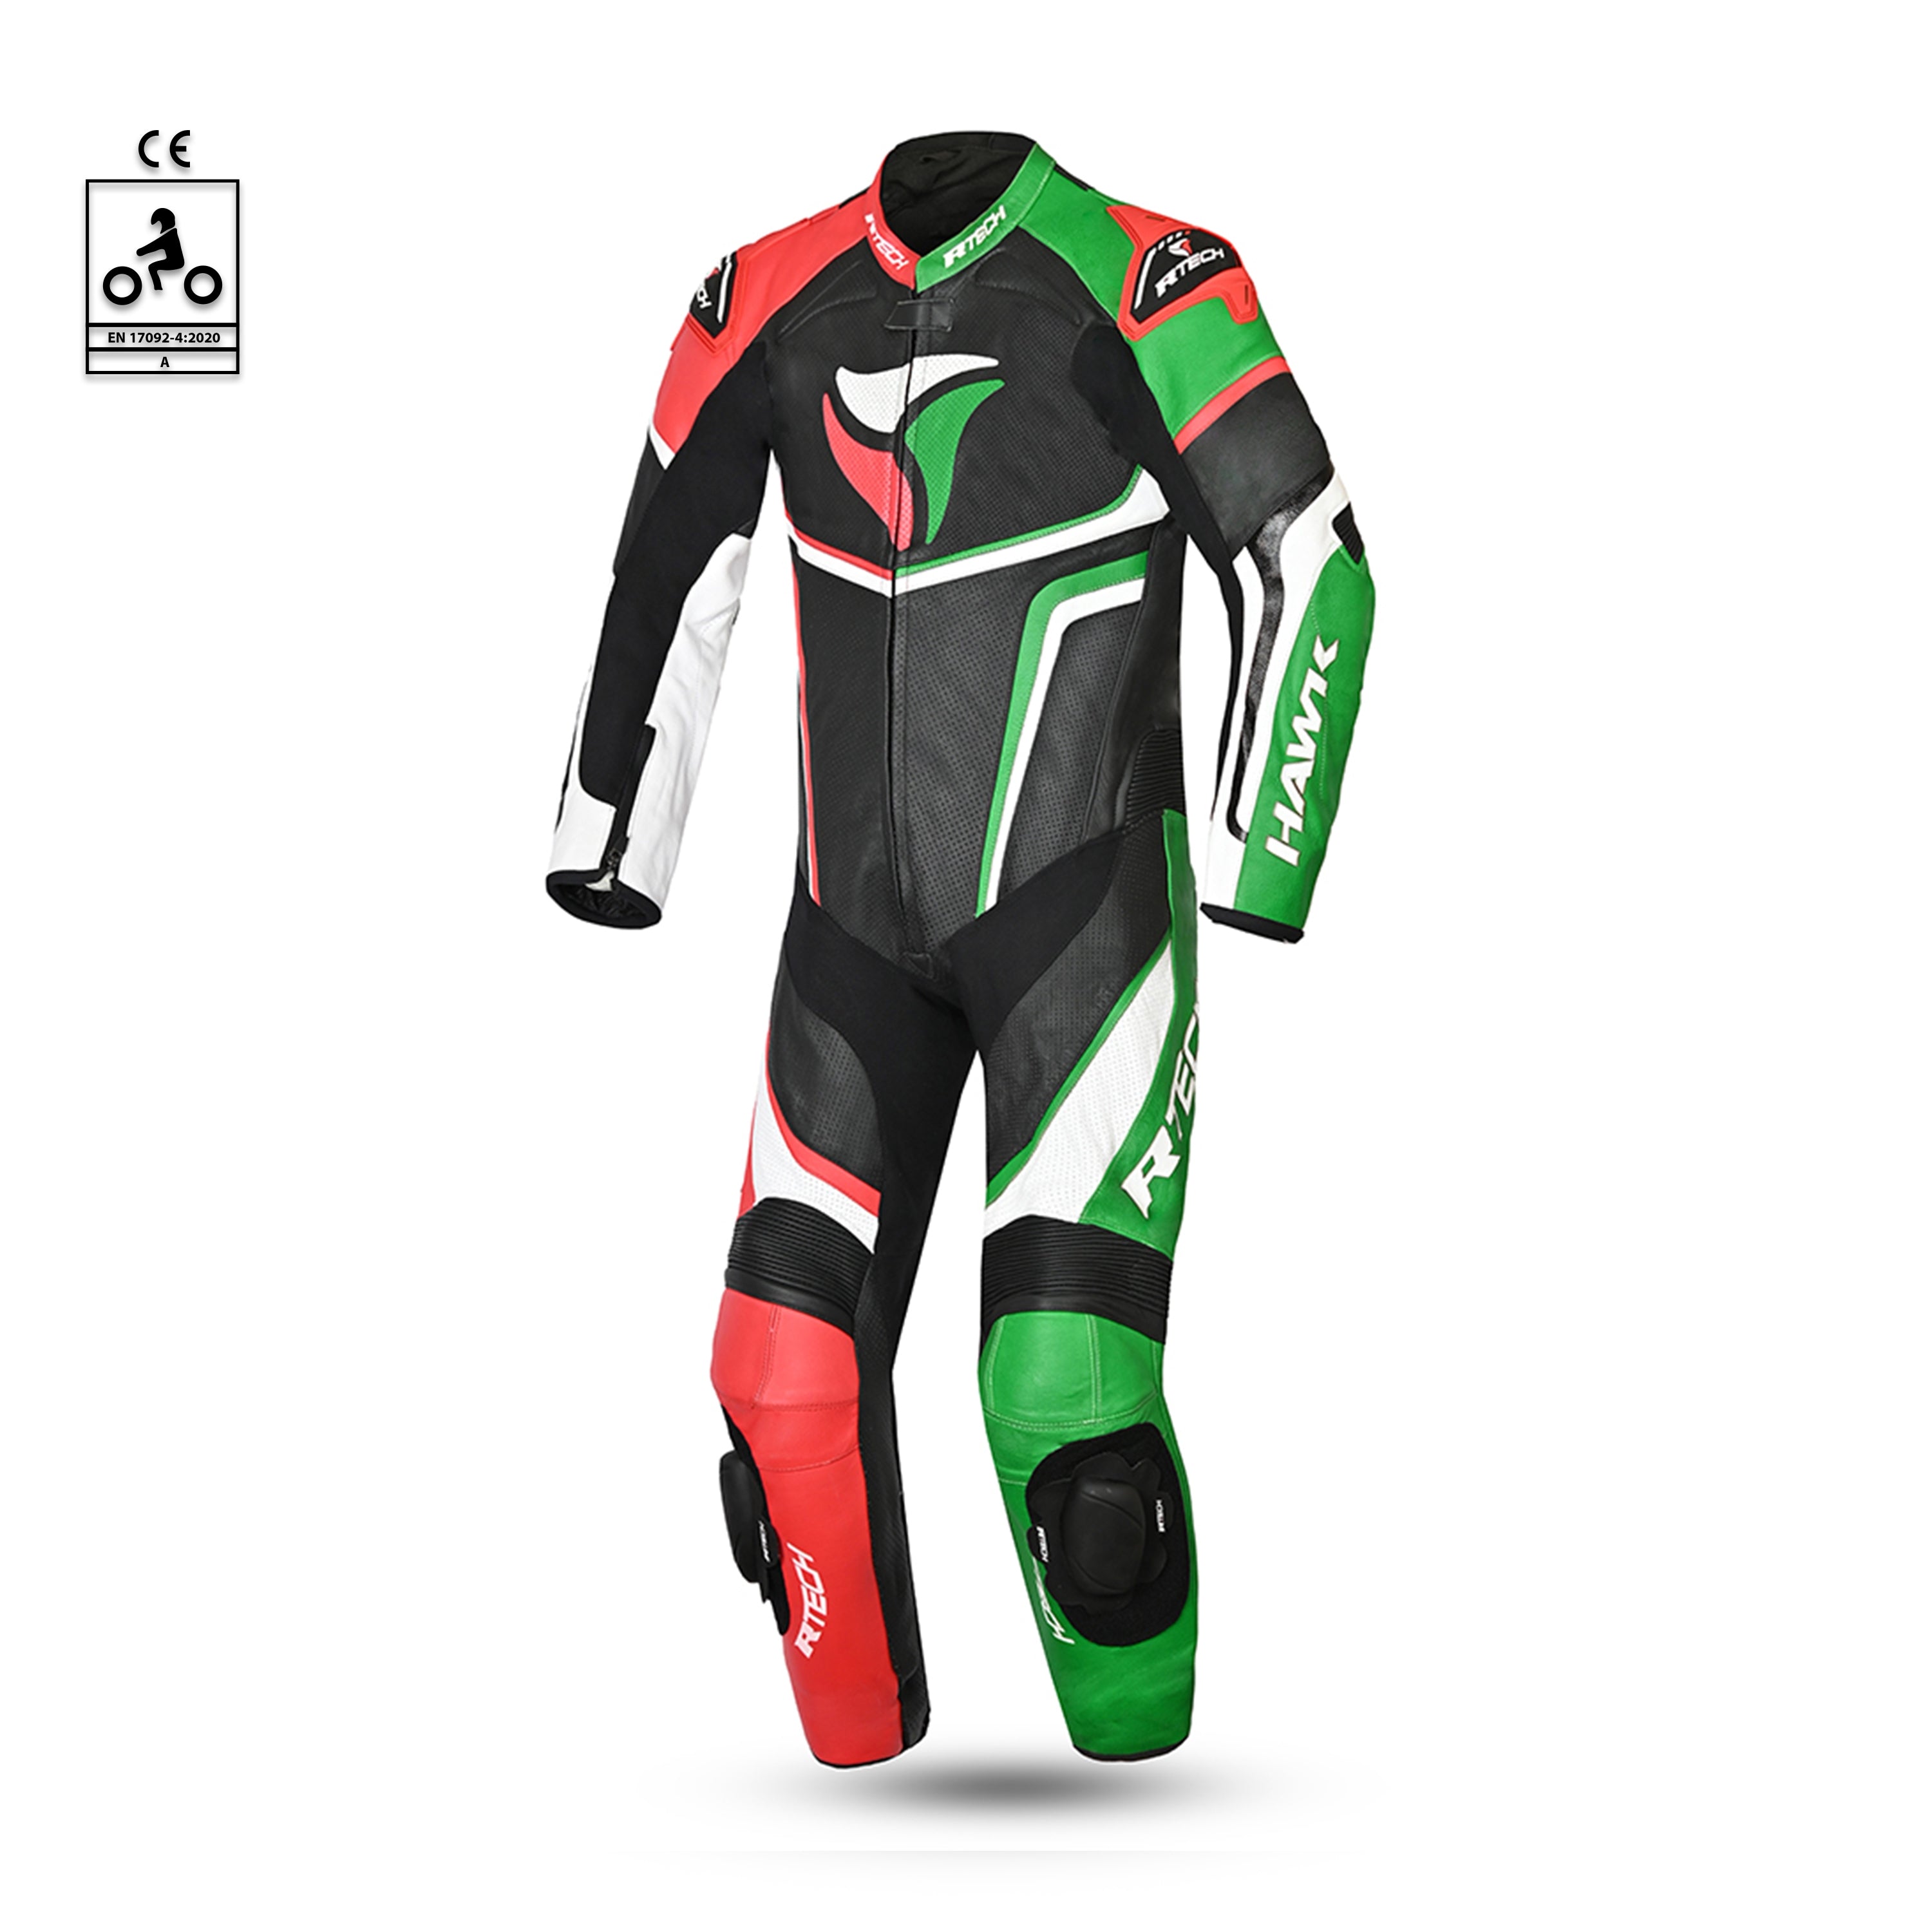 R Tech Hawk 1PC Motorcycle Racing Suit Green Black Red White